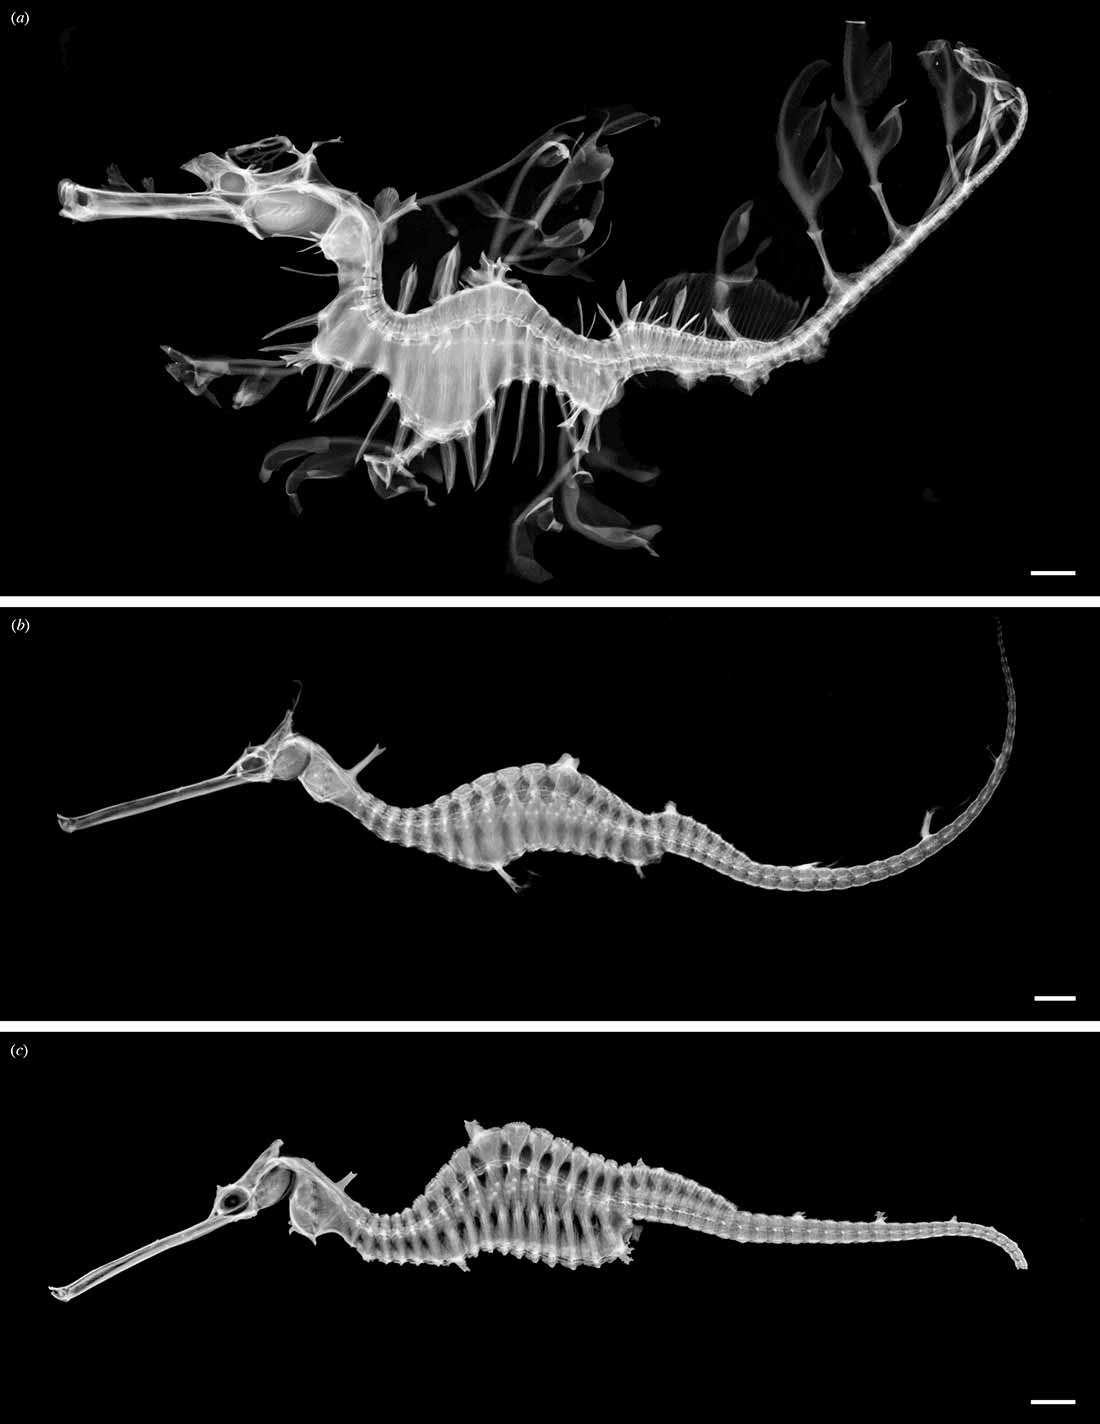 Photo: A comparison of the three species of seadragons